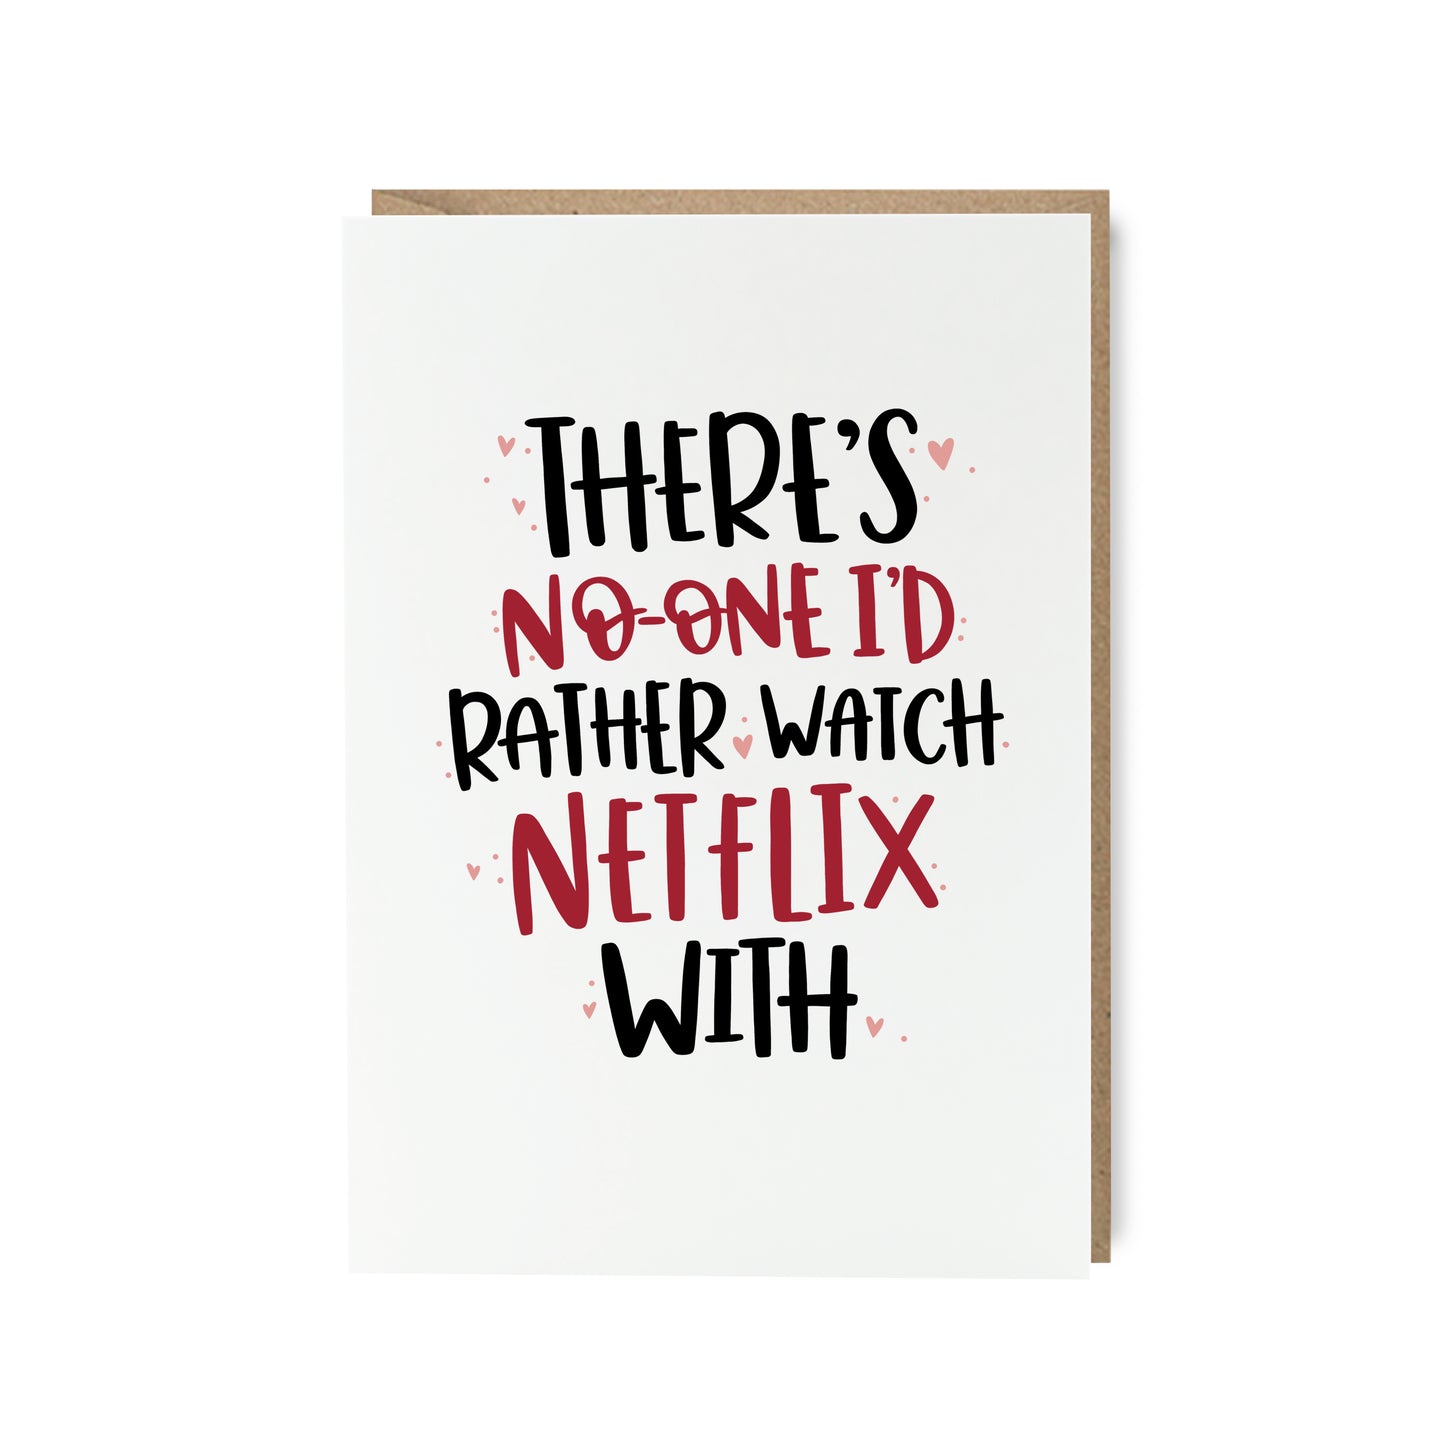 There's no one I'd rather watch netflix with anniversary card by abbie imagine